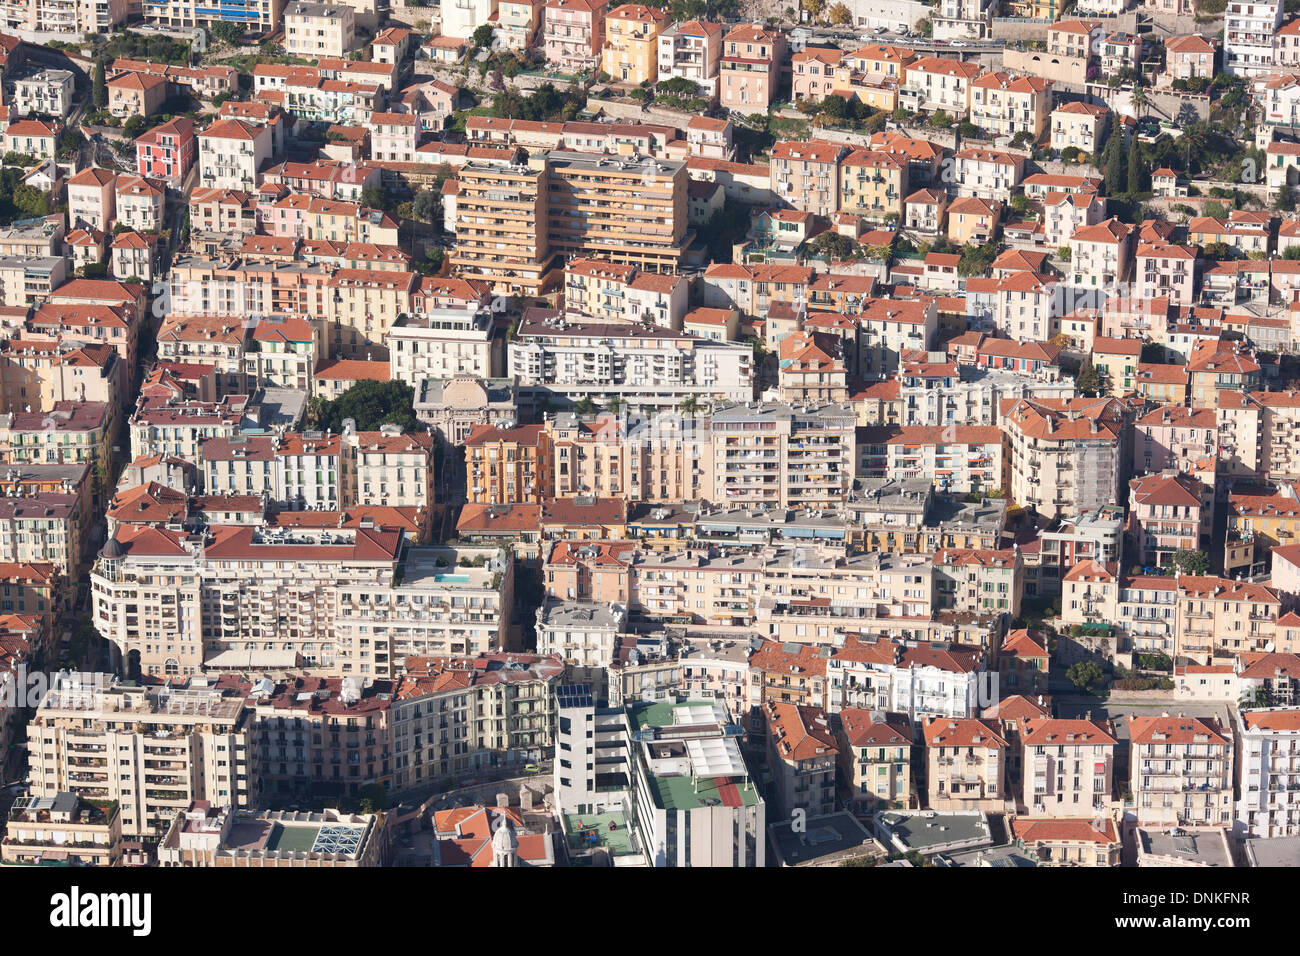 AERIAL VIEW. High density of apartment buildings on a steep hillside. Principality of Monaco (lowest half) and Beausoleil, France (highest half). Stock Photo